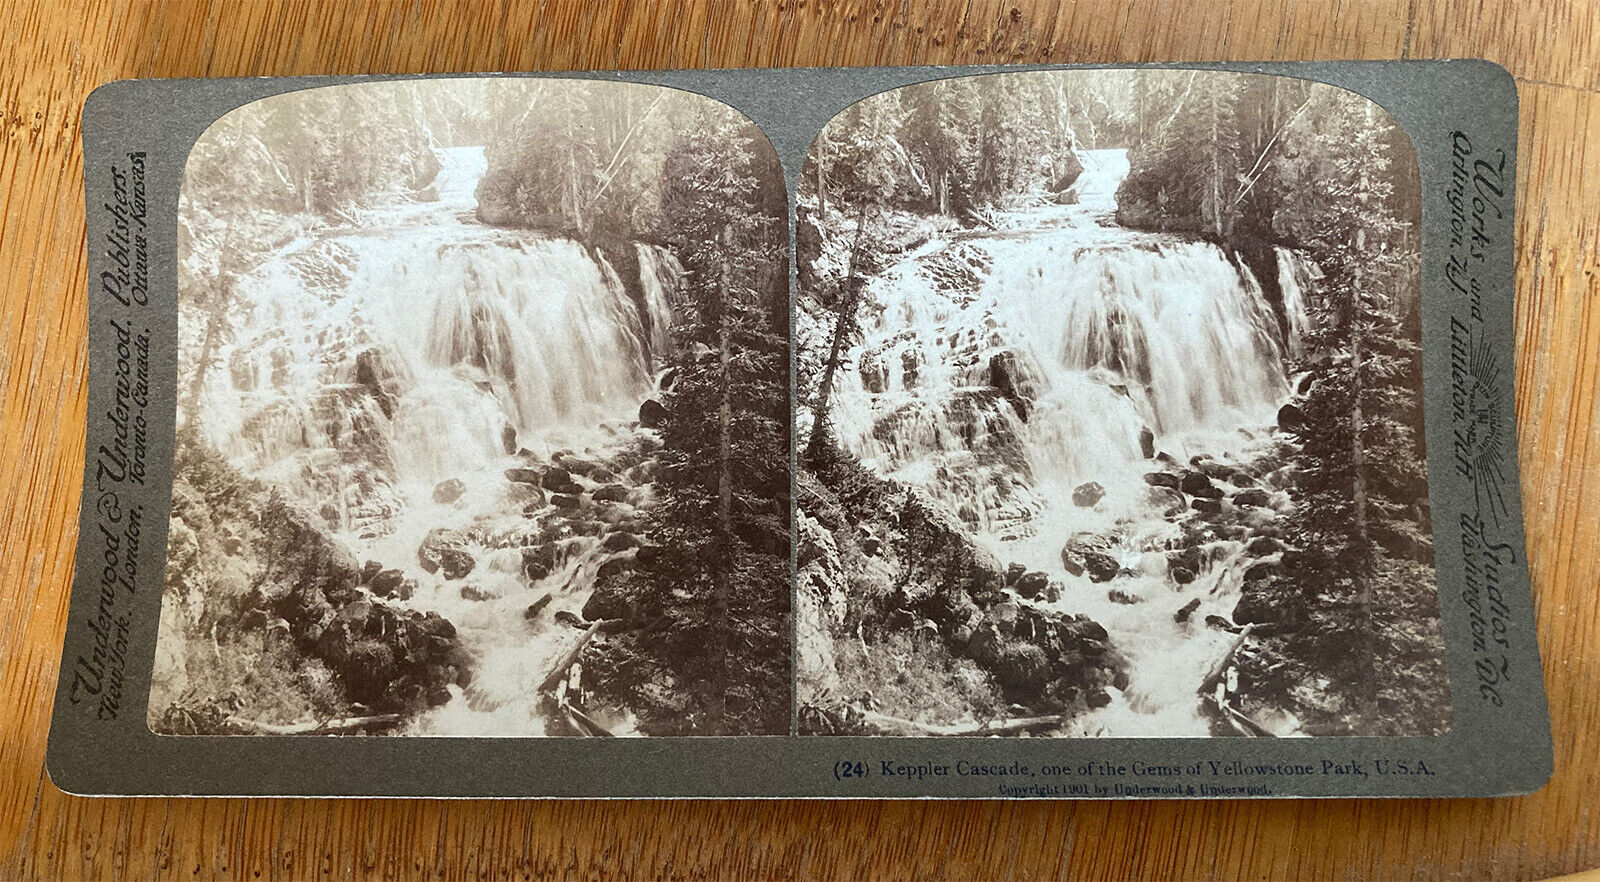 Kepler Cascades, one of the Gems of Yellowstone Park U.S.A. – 1901 Stereoview